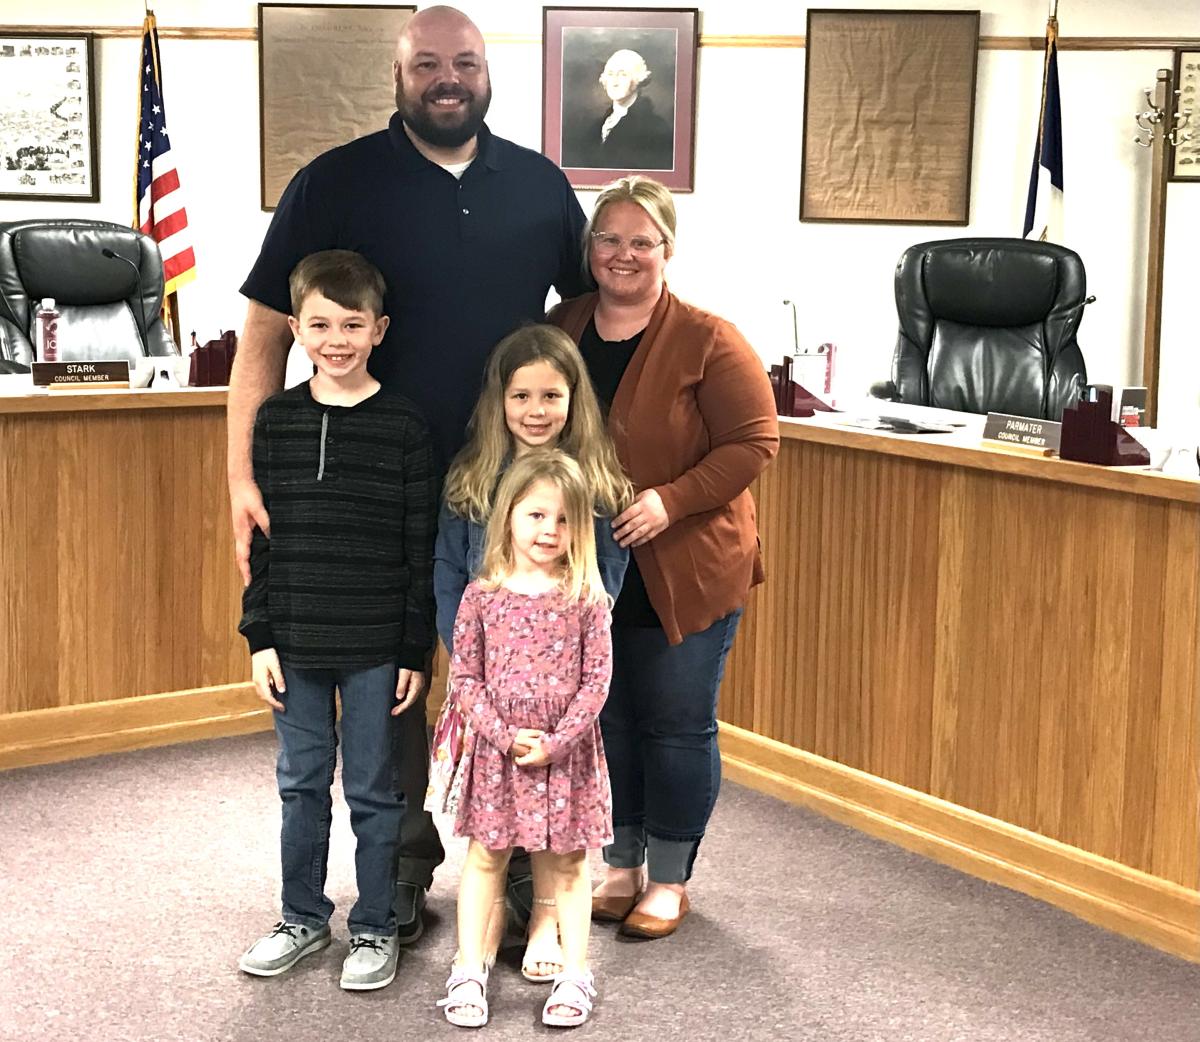 The Recker family came to support the new 4th Ward Councilman as he was sworn in tonight. Click to read article